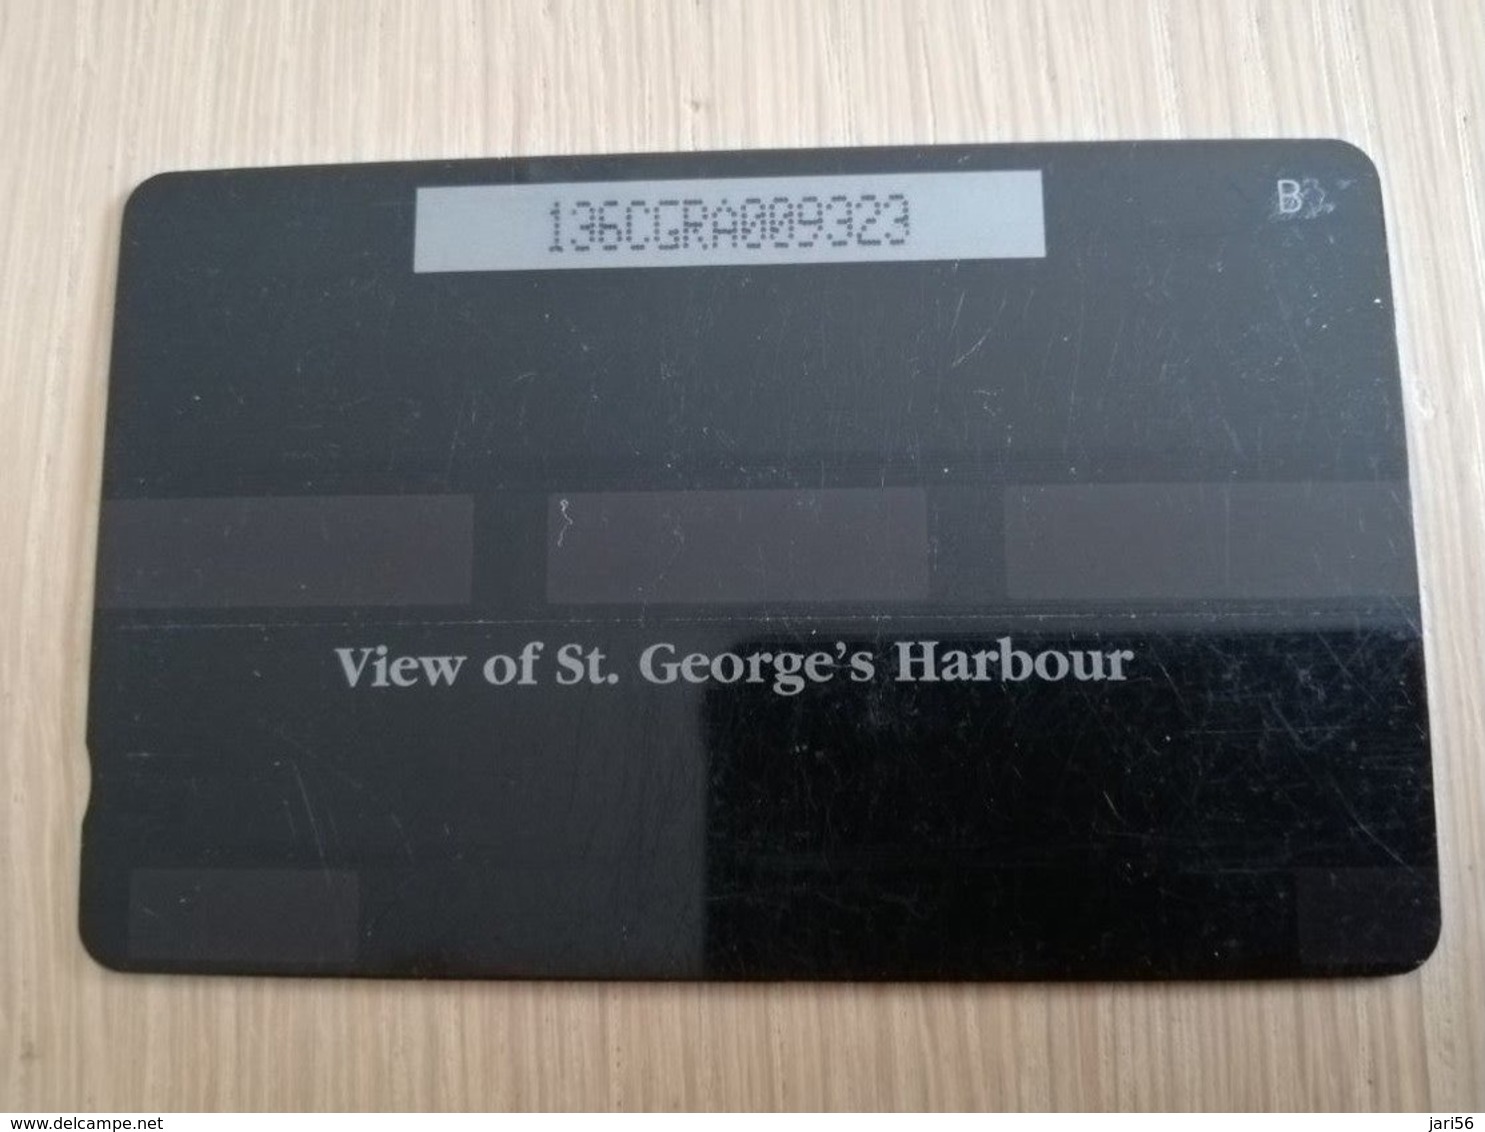 GRENADA  $ 10,- GPT GRE-136CGRA  VIEW OF ST GEORGES HARBOUR     MAGNETIC    Fine Used Card    **2268** - Grenade